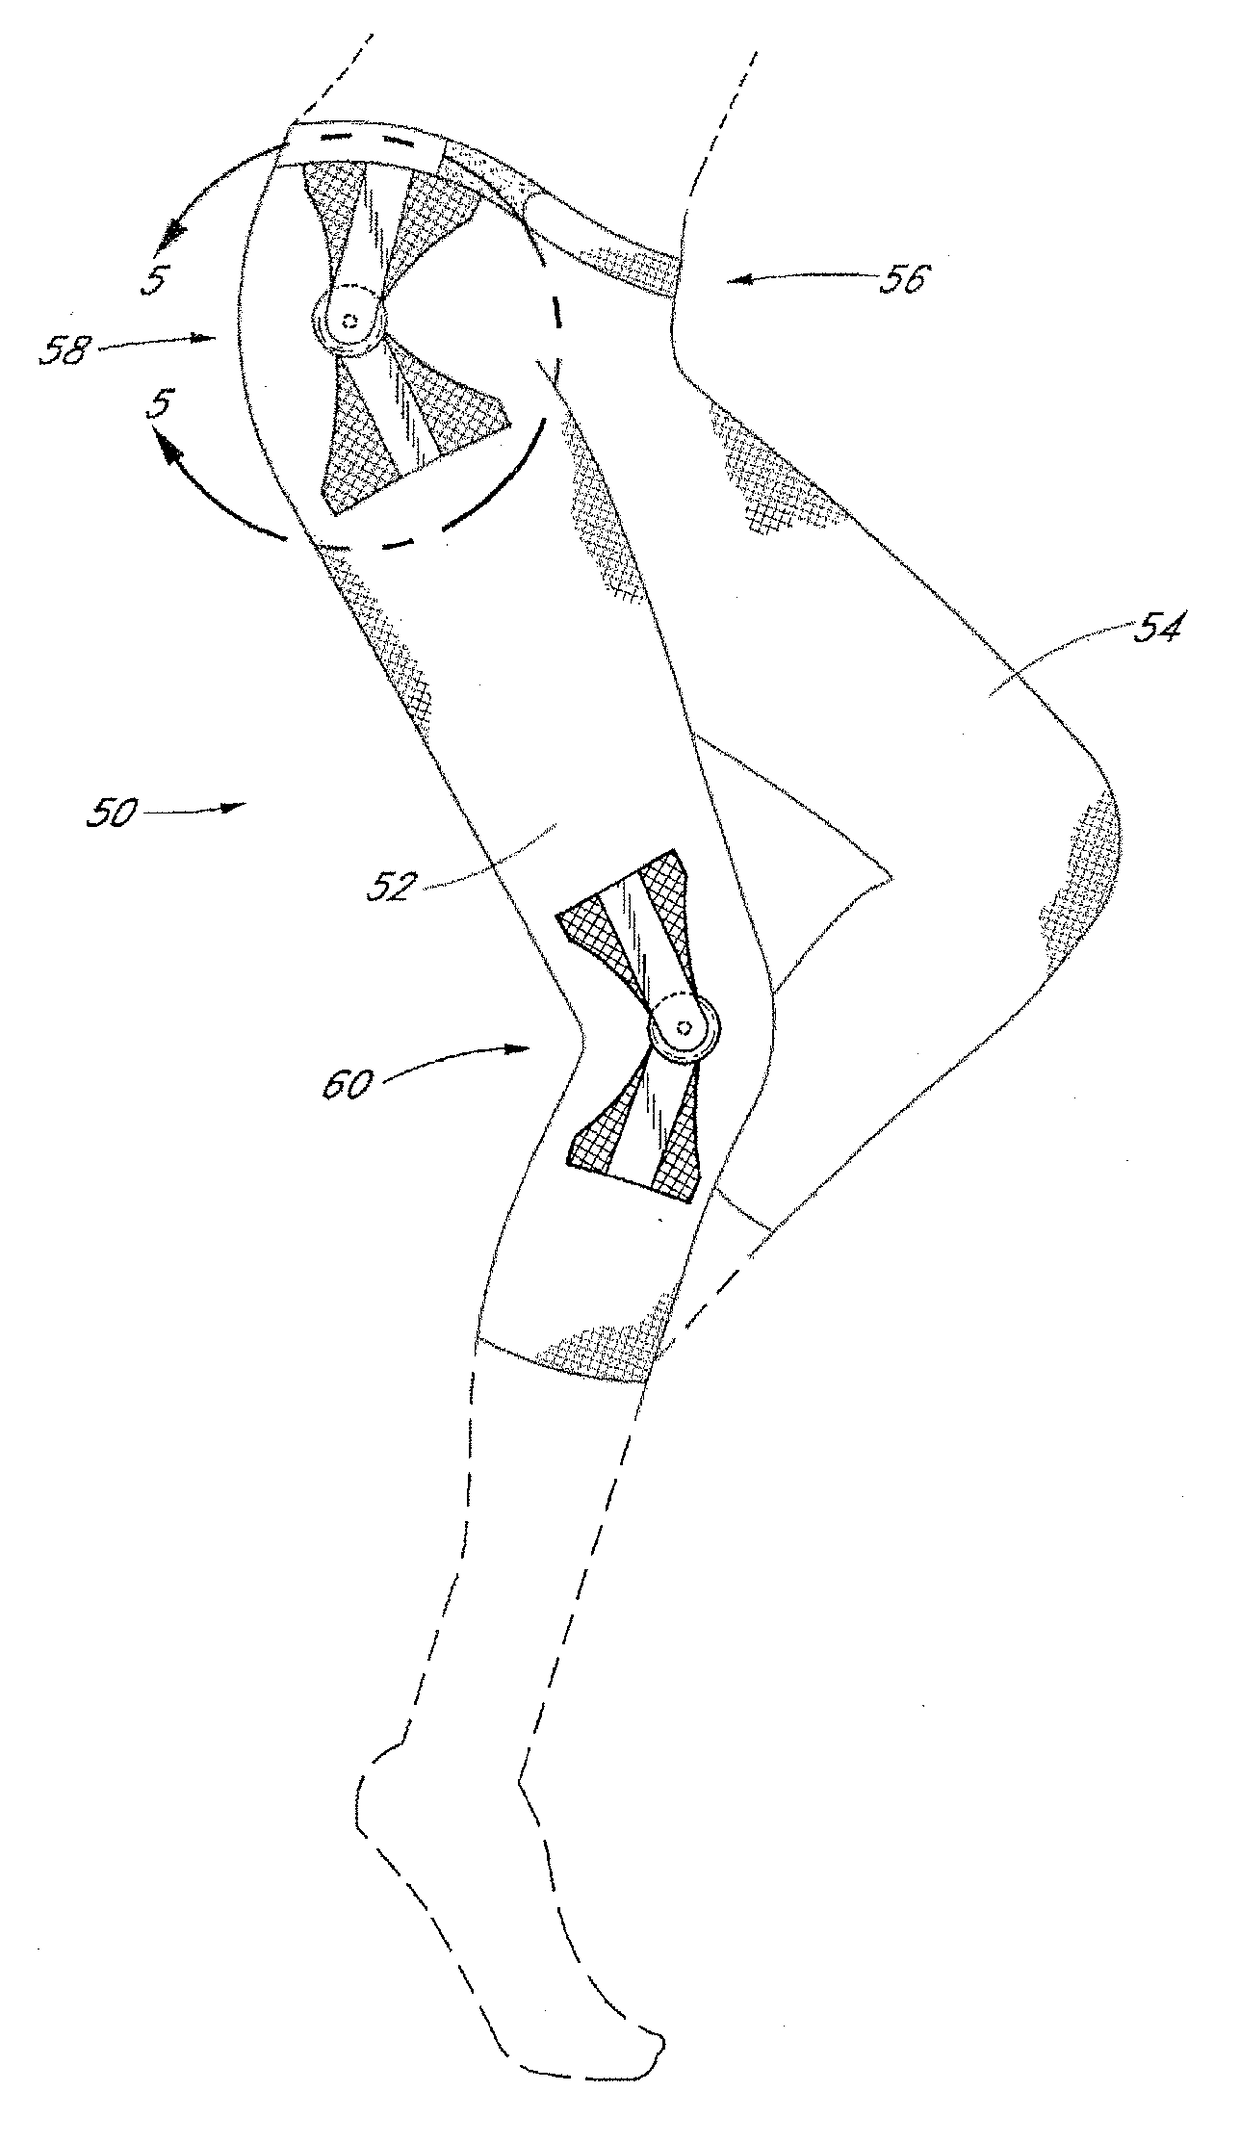 Wearable resistance device with power monitoring